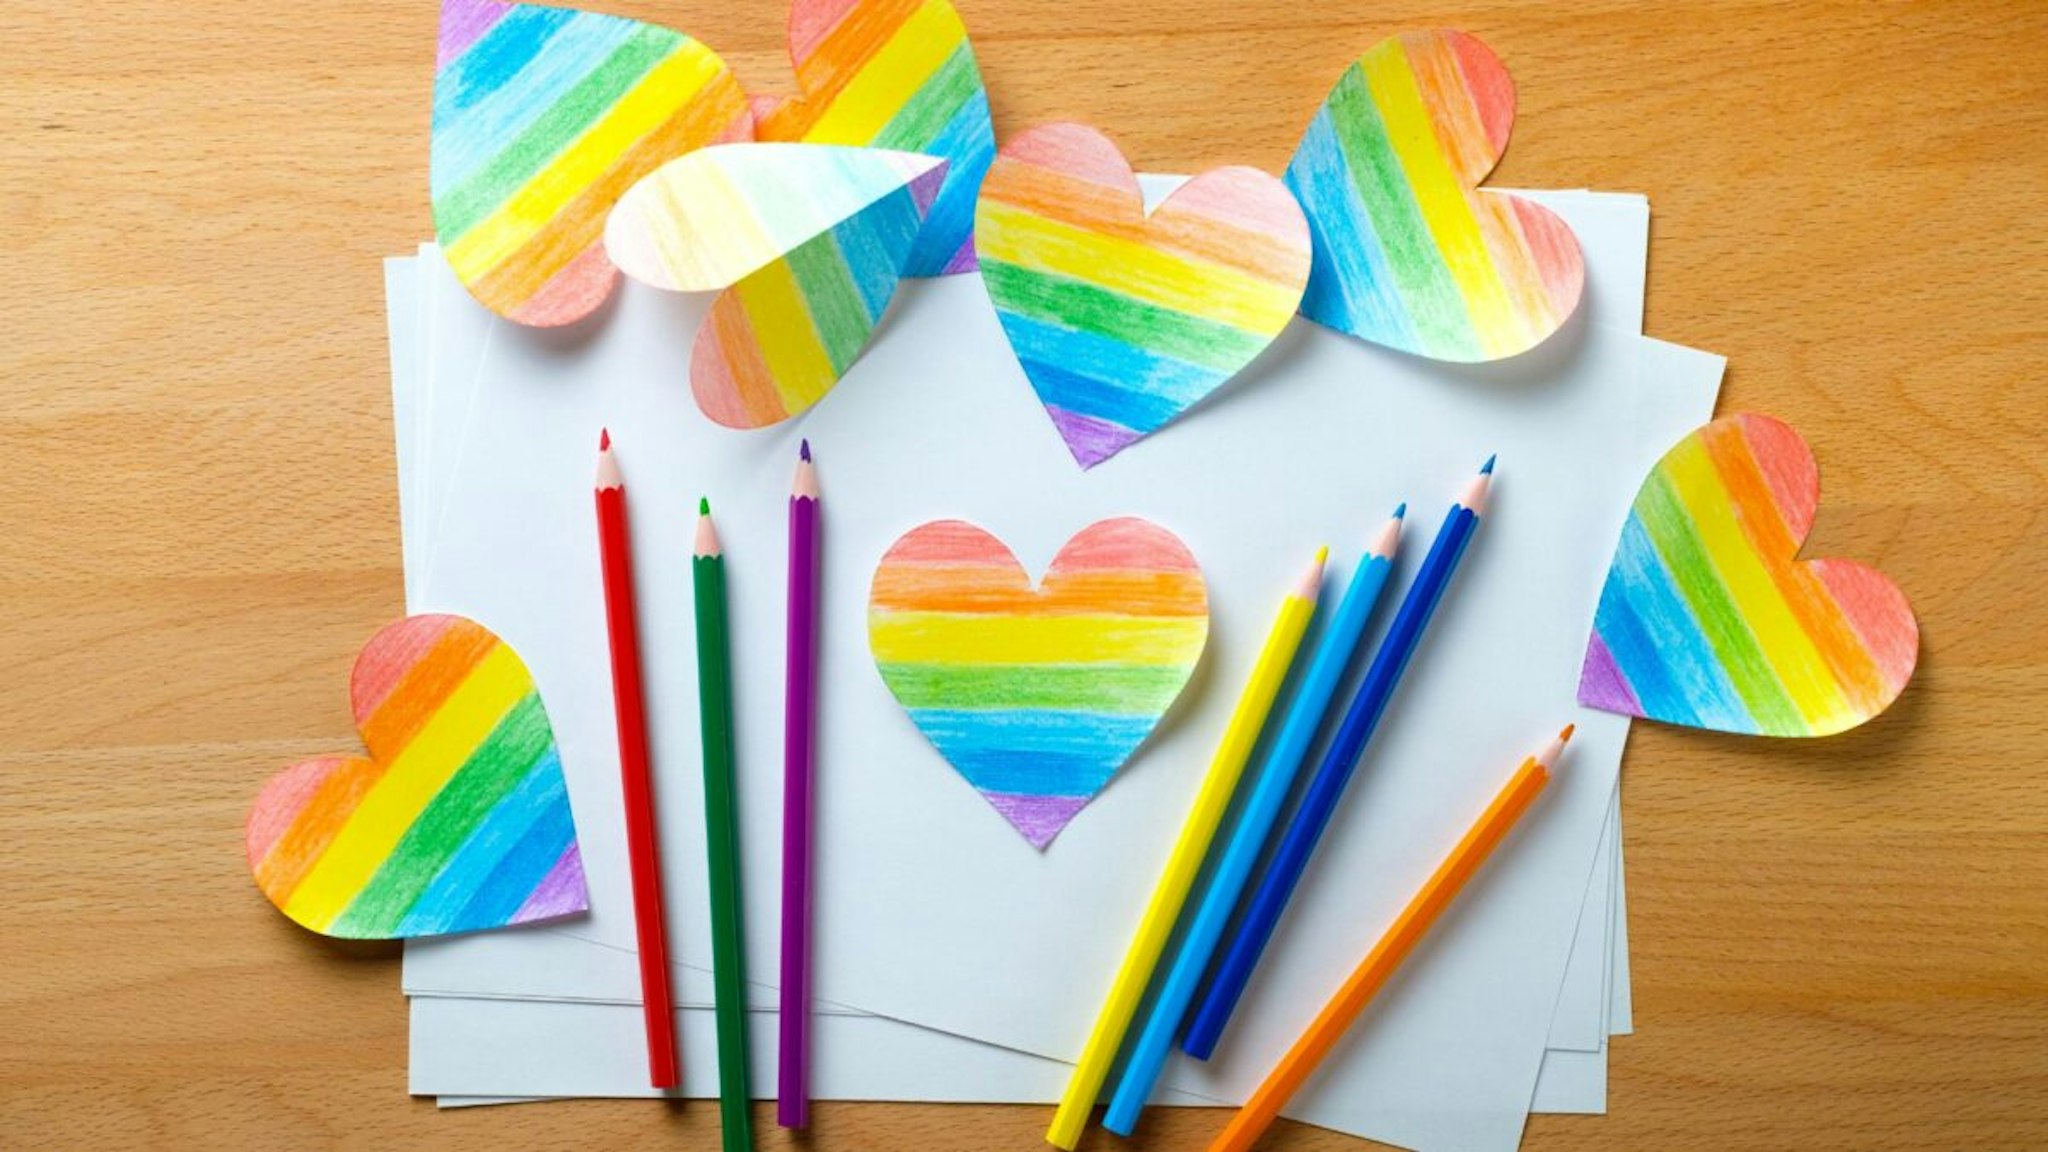 The heart is carved and drawn on white paper and painted in the color of the LGBT flag.